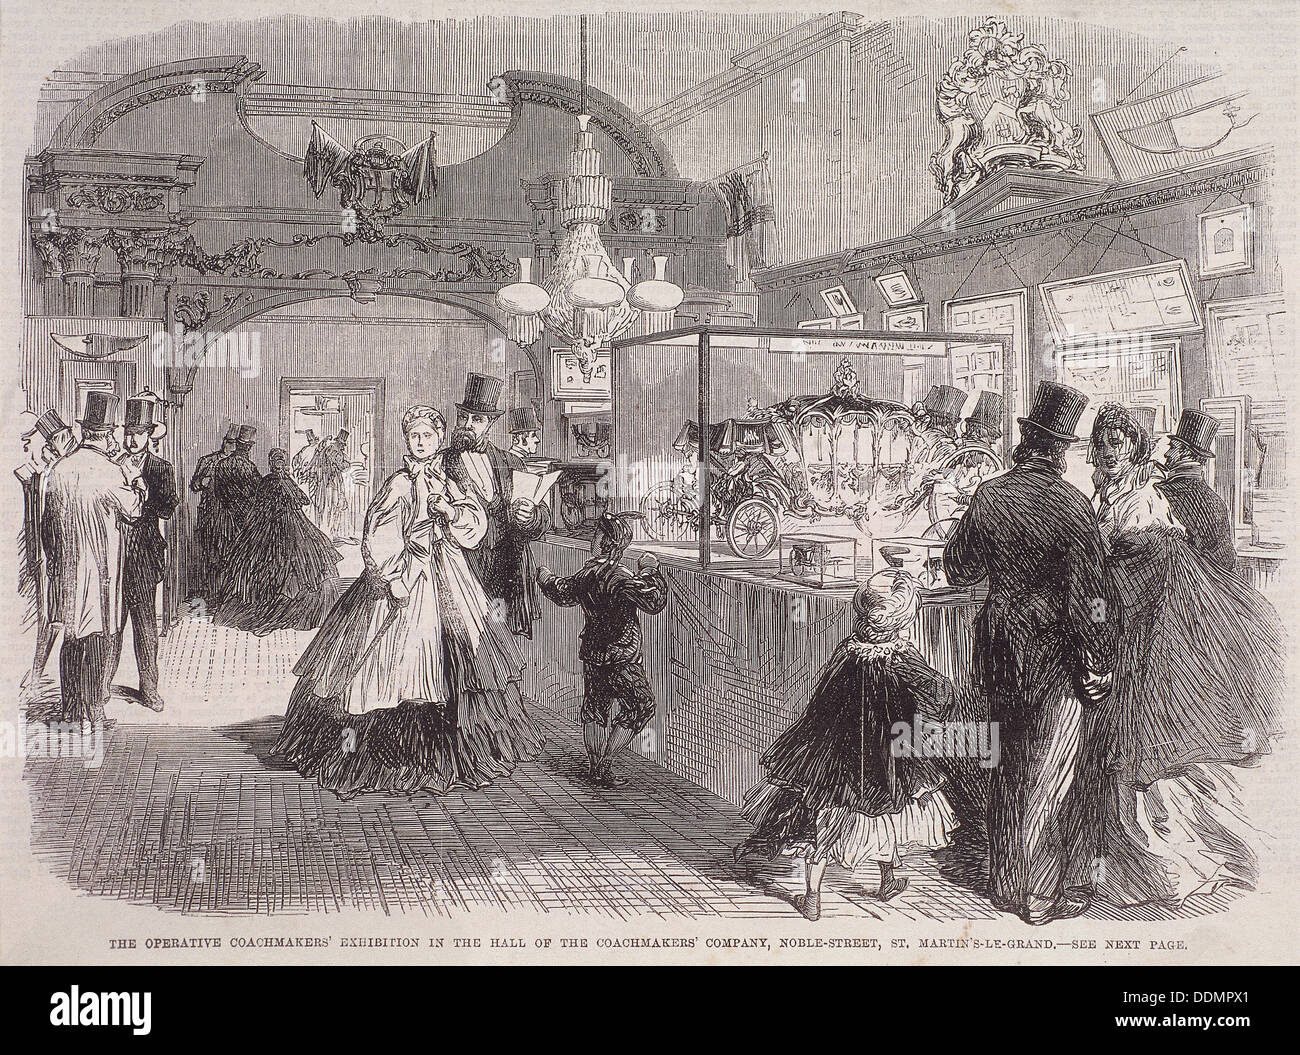 Exhibition at Coachmakers' Hall, Noble Street, London, 1865. Artist: Anon Stock Photo